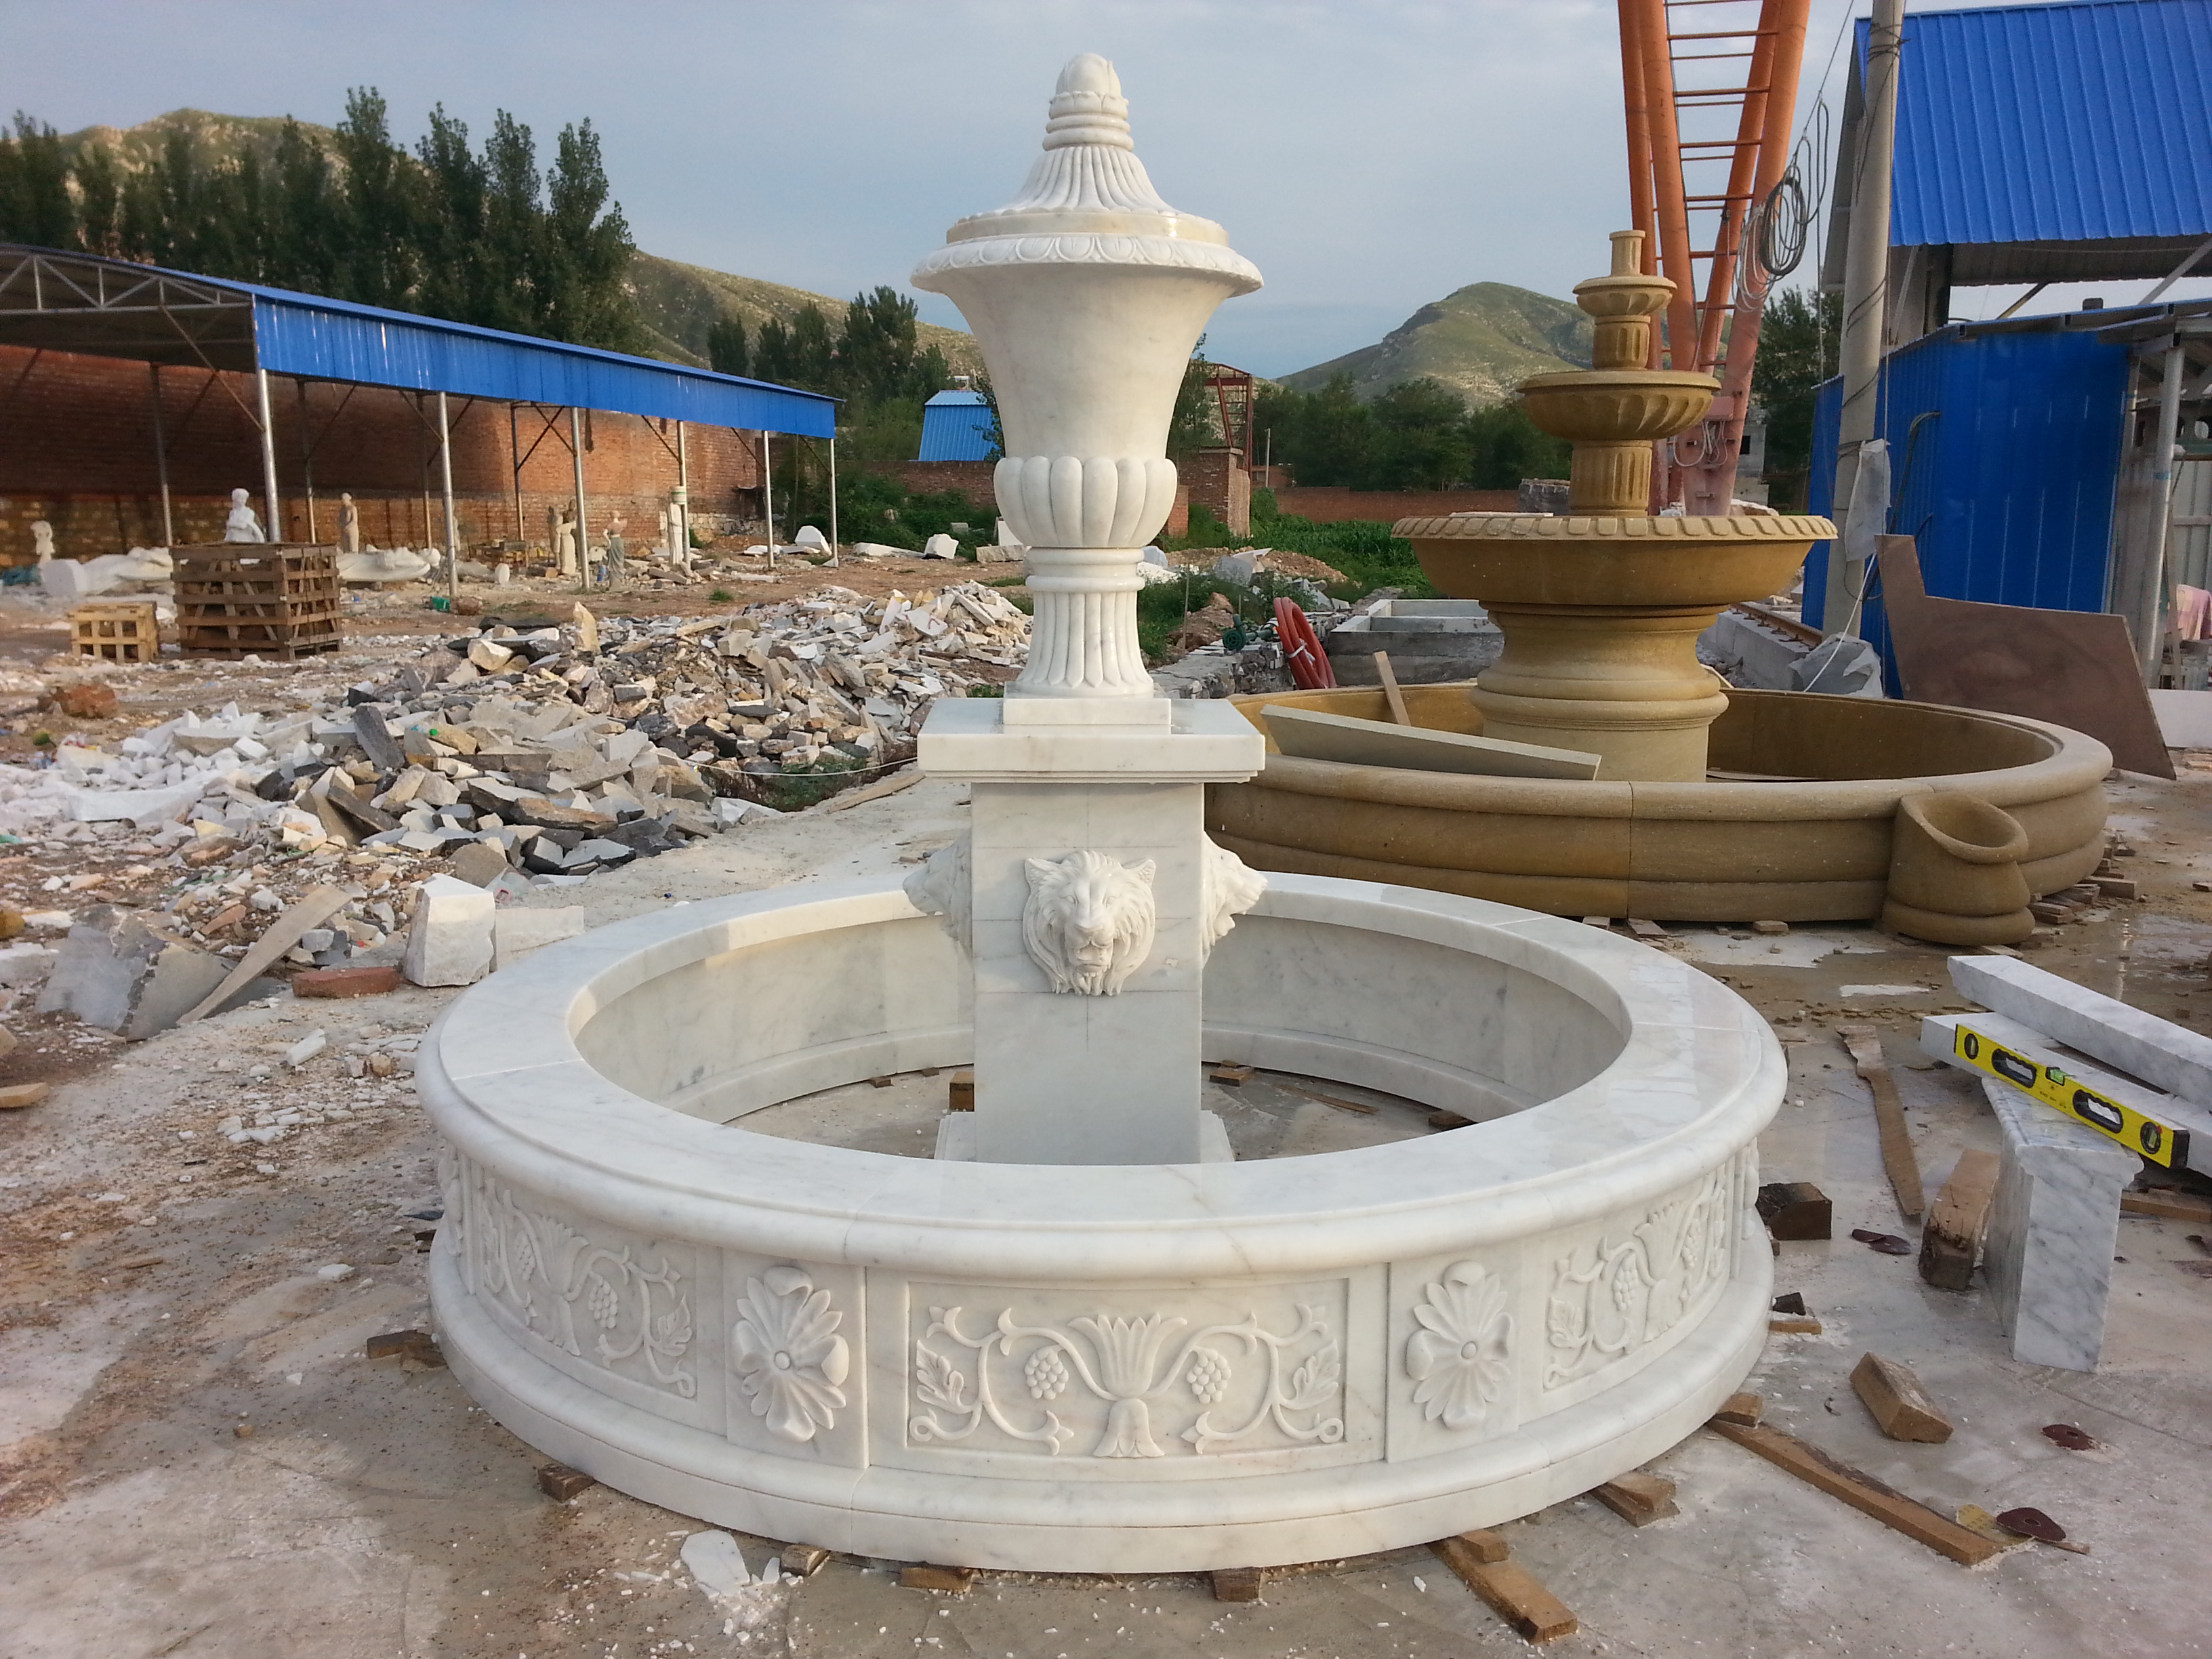 Stone carving fountain for the home & garden?